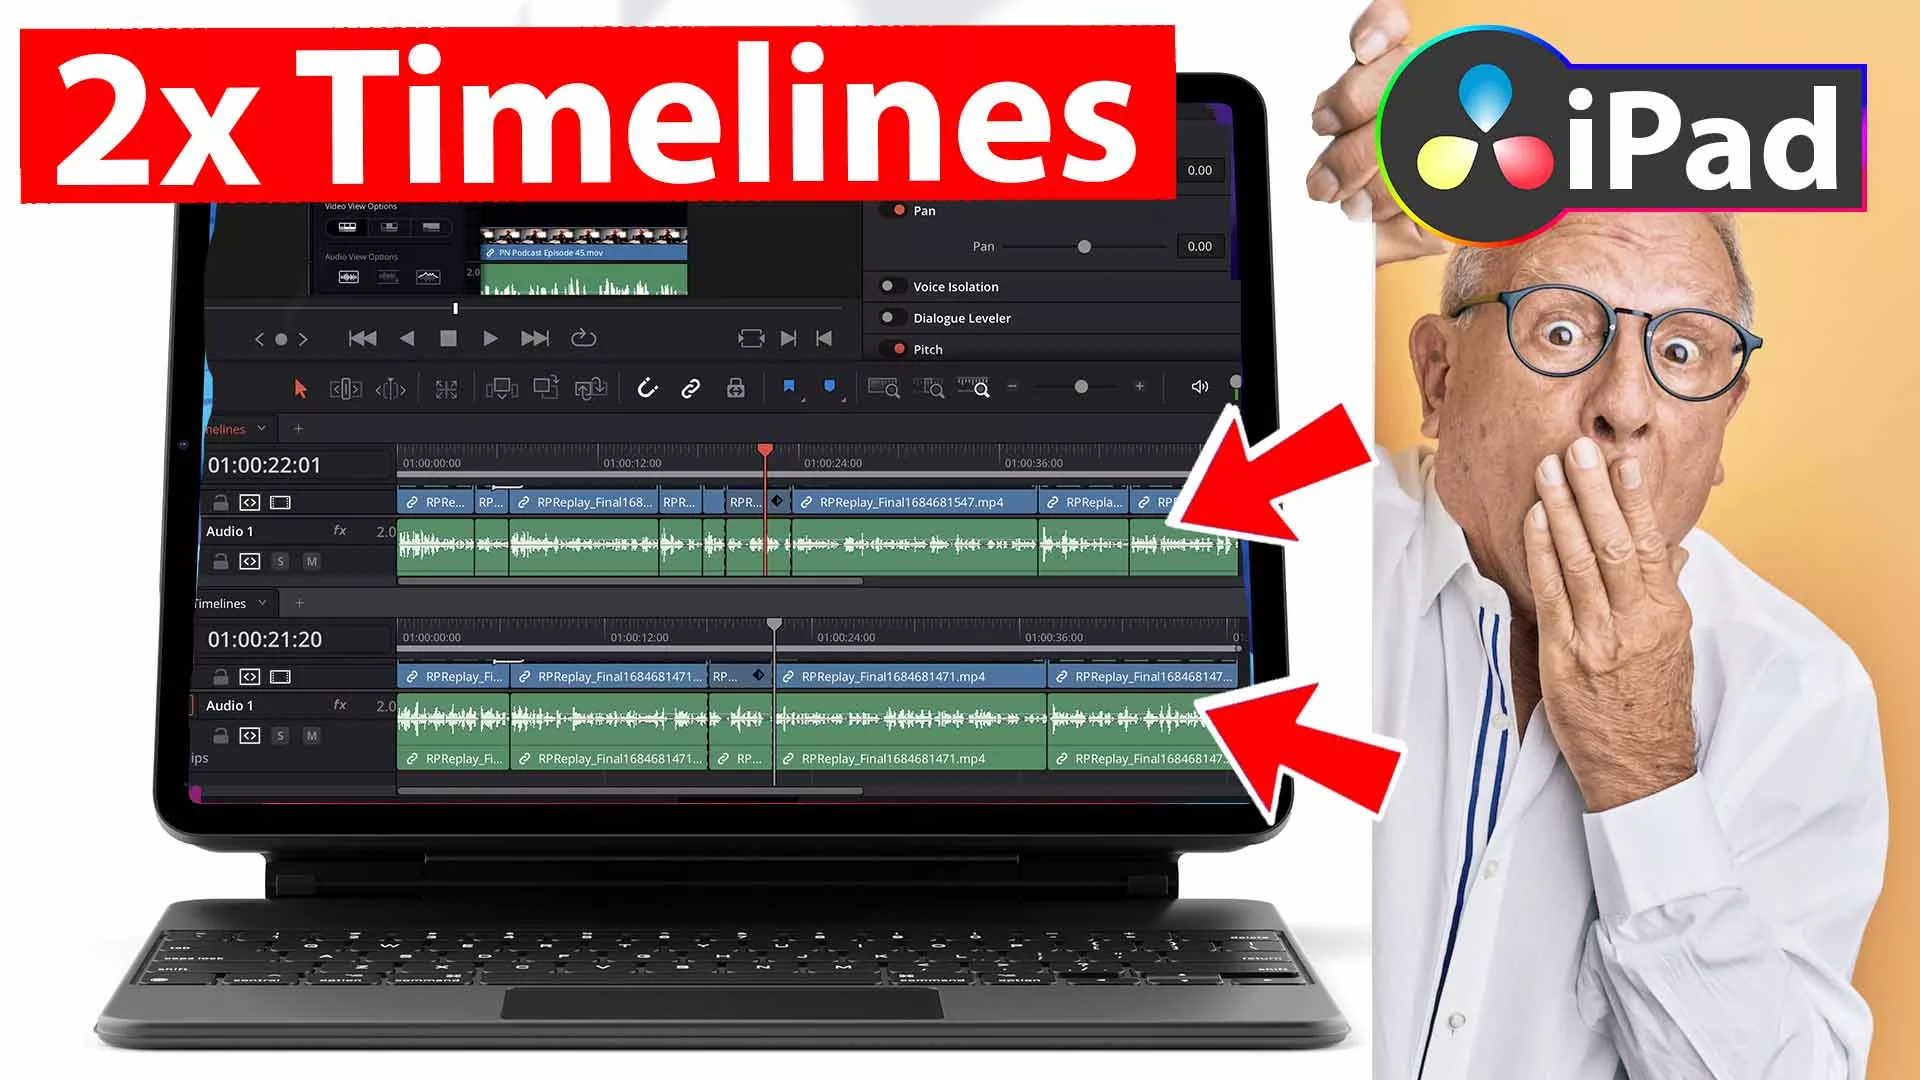 Did You Know that you can edit in 2 Timelines at once?